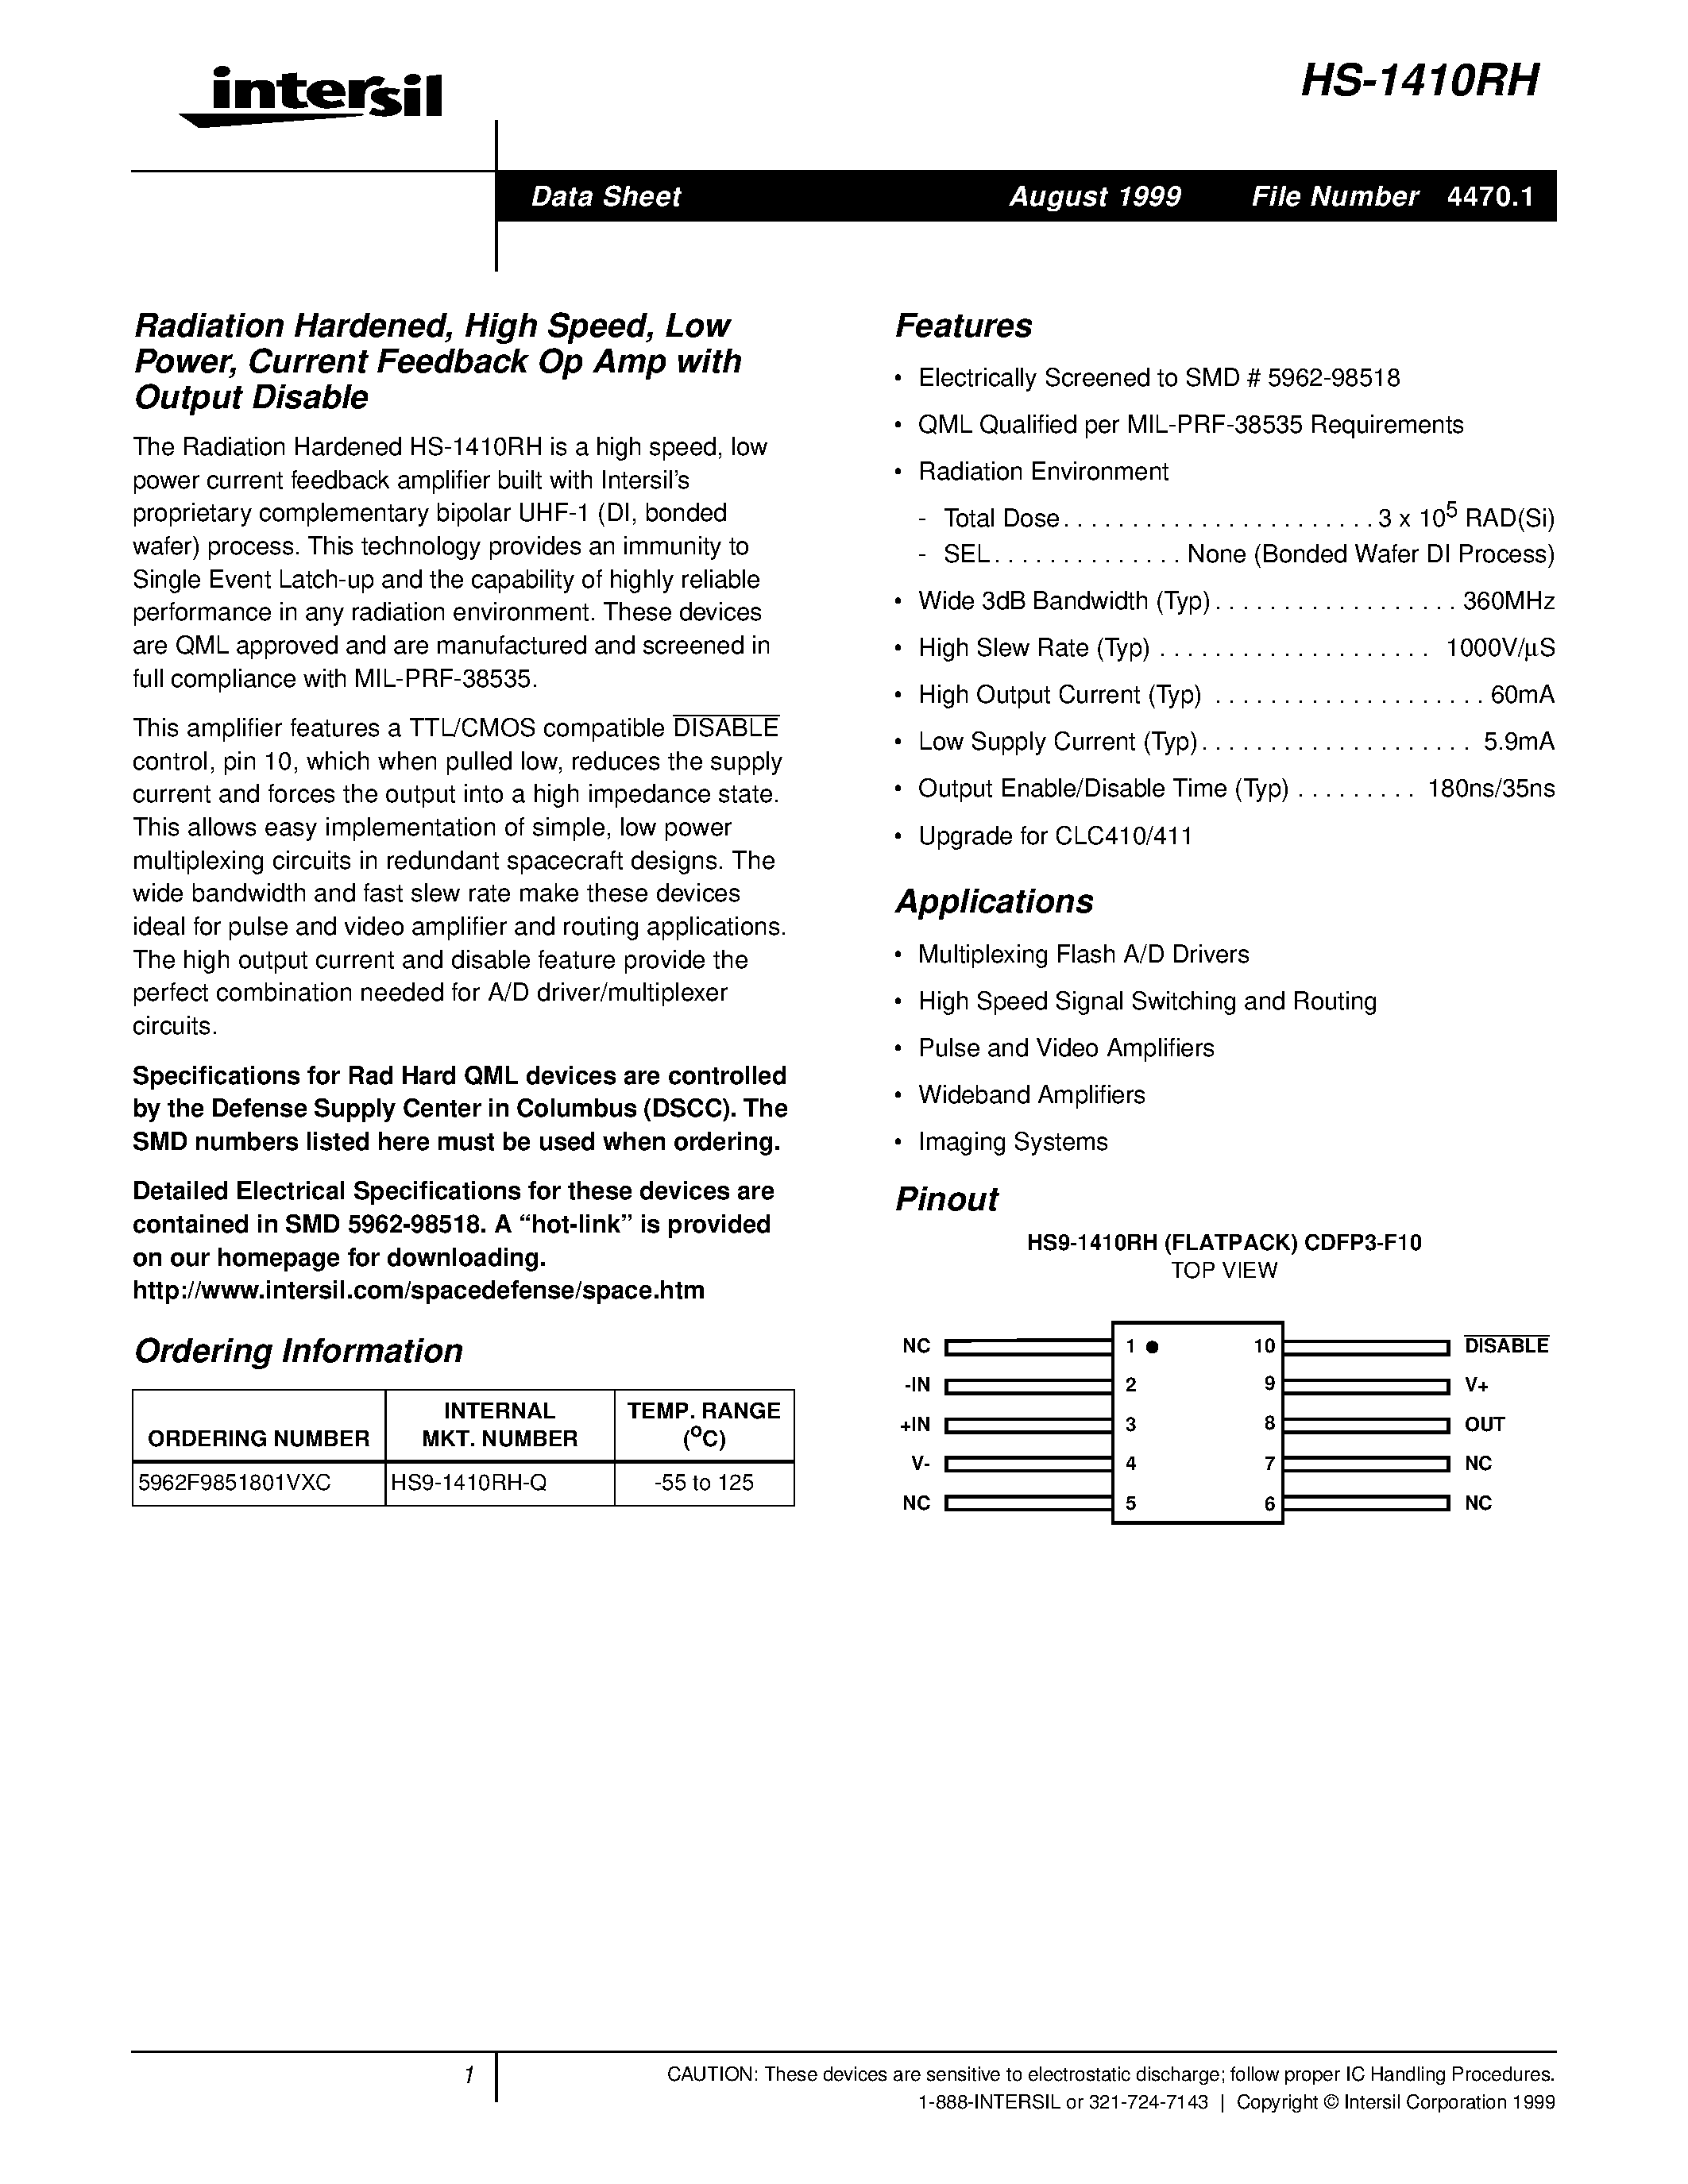 Datasheet HS9-1410RH-Q - Radiation Hardened/ High Speed/ Low Power/ Current Feedback Op Amp with Output Disable page 1